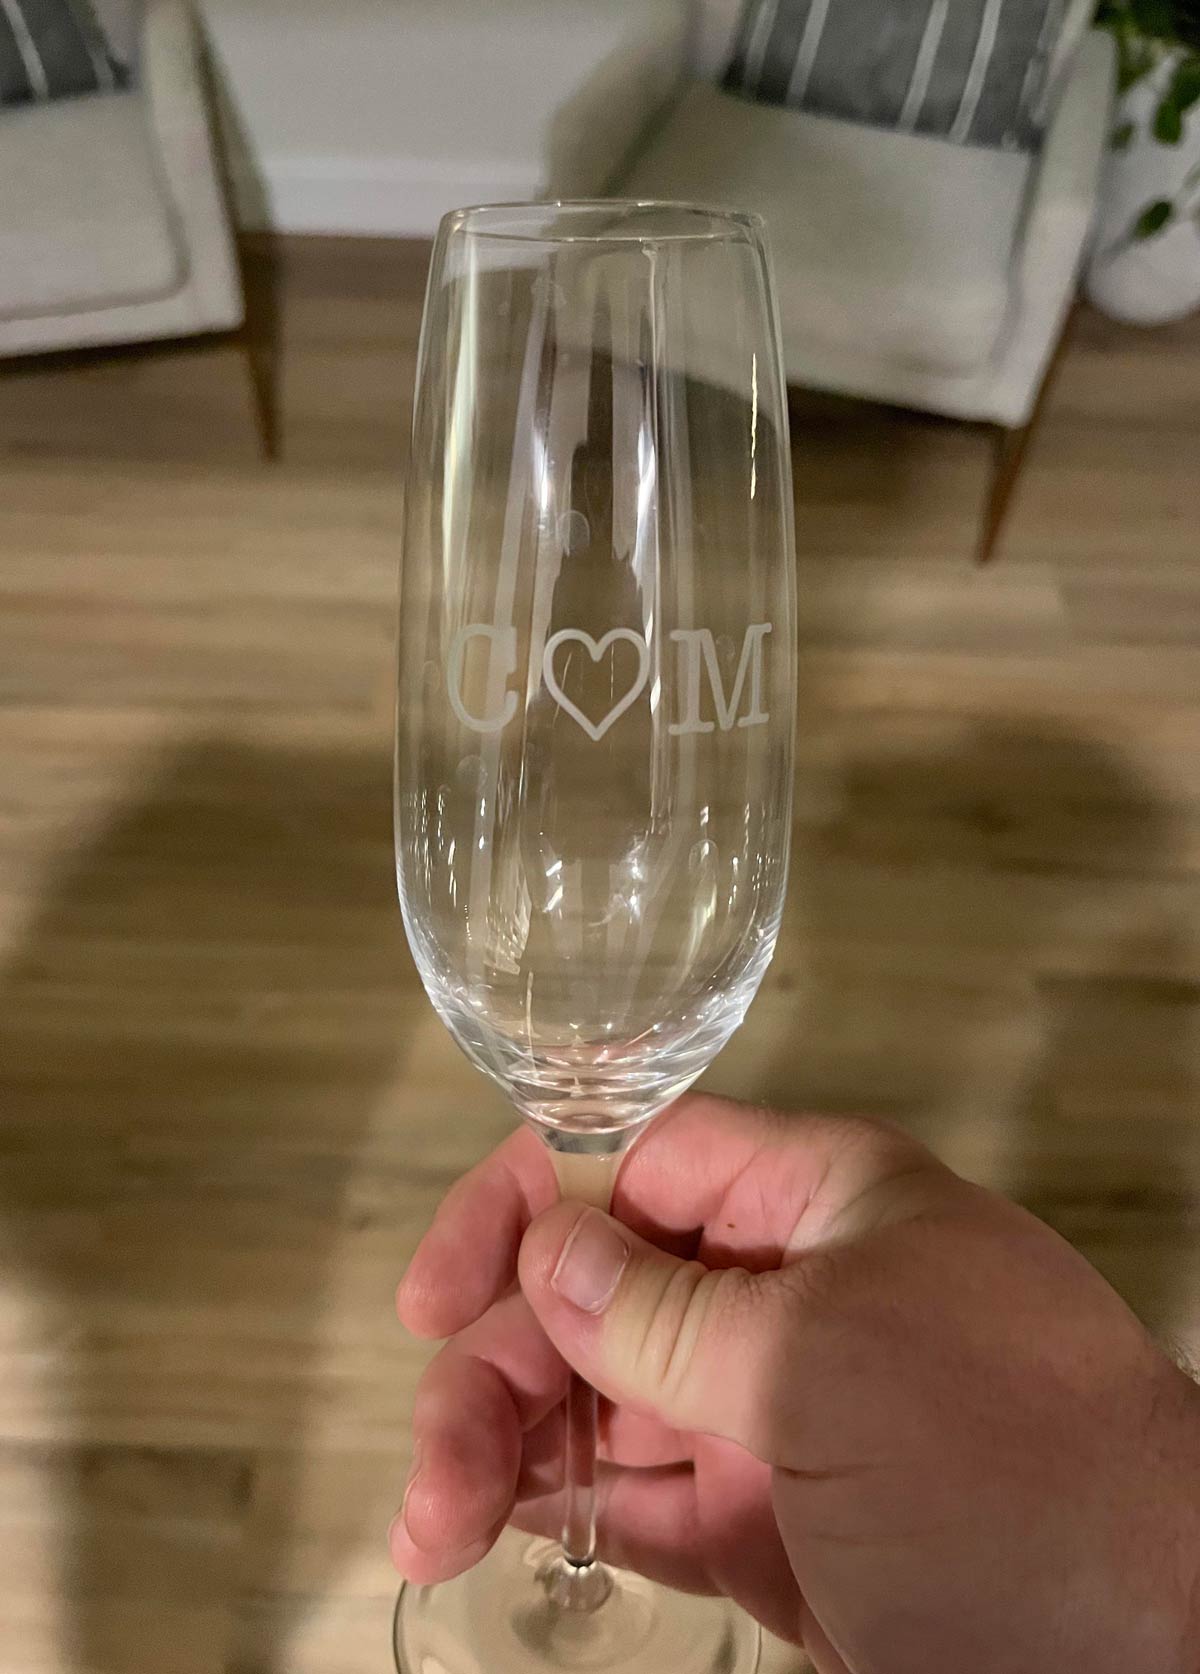 My mom gave me and my wife these wine glasses with our initials engraved